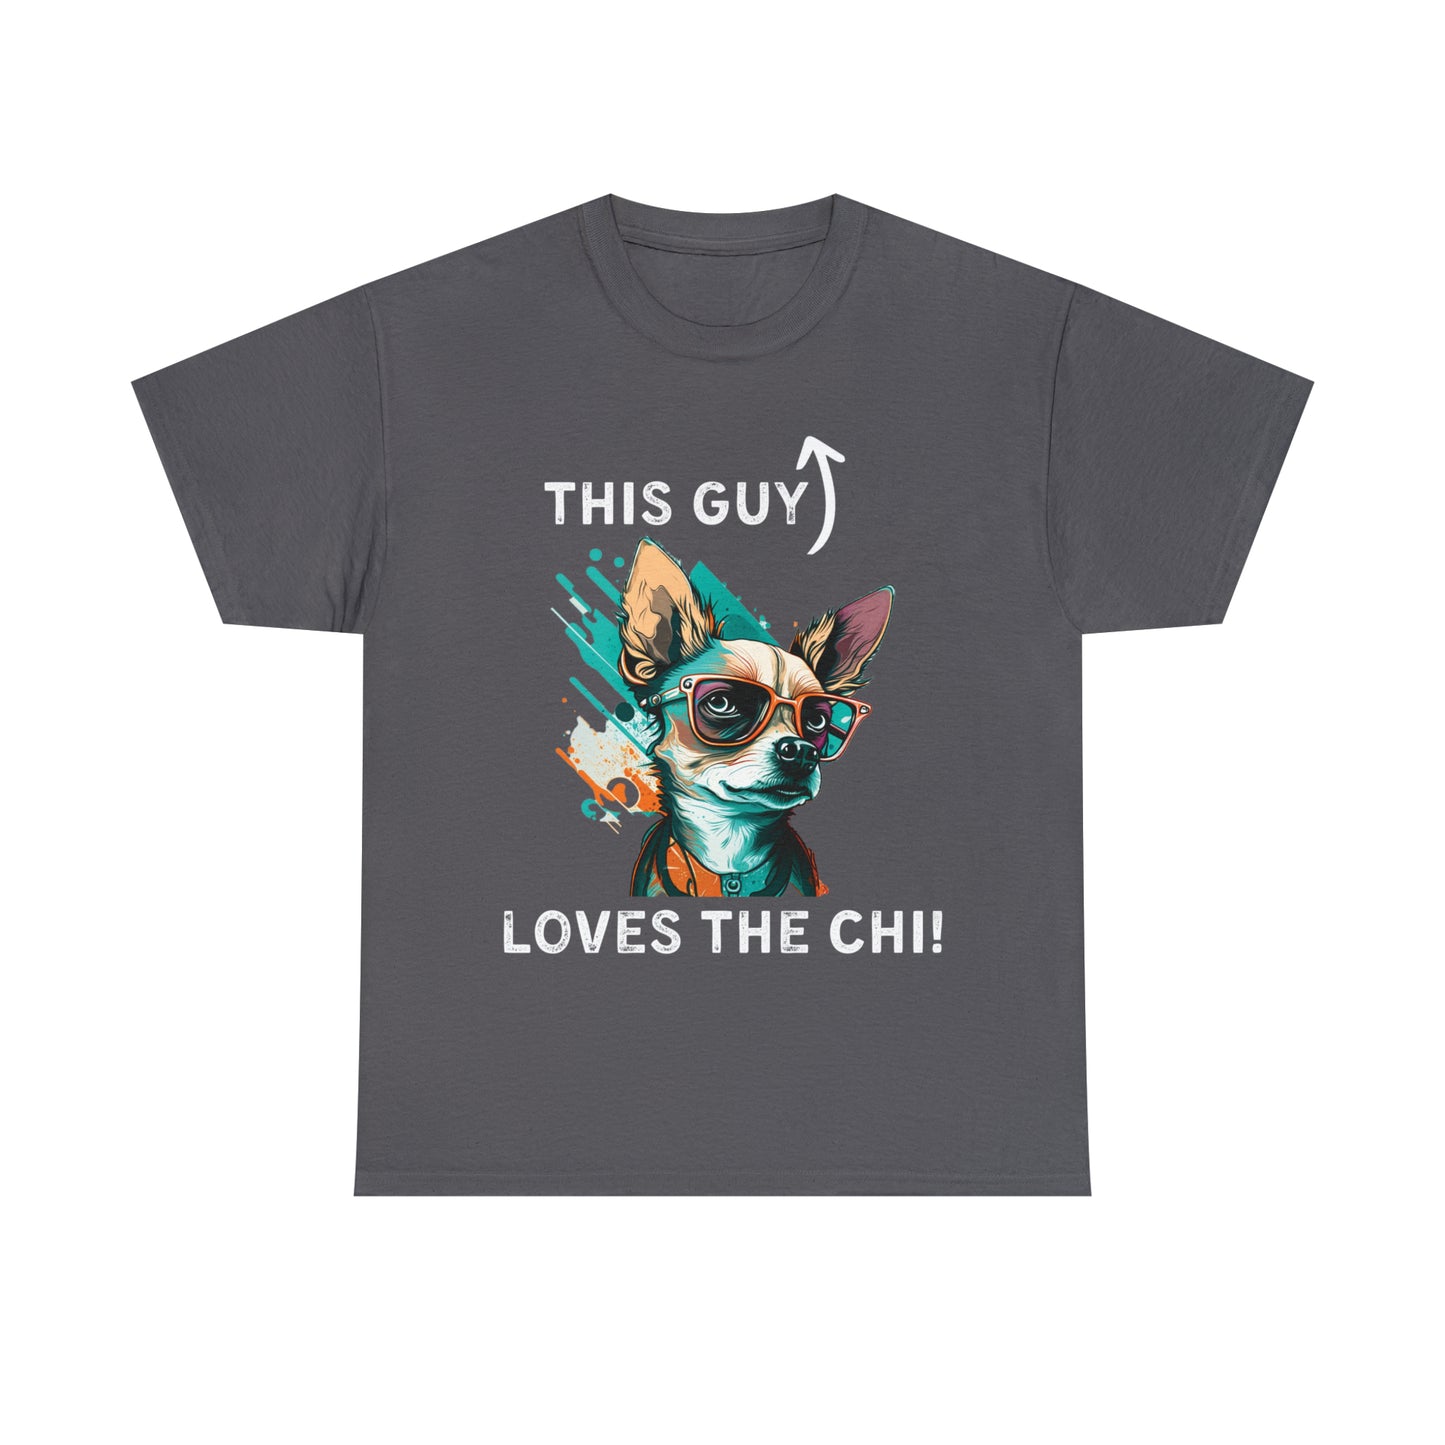 This Guy Loves The Chi t-shirt